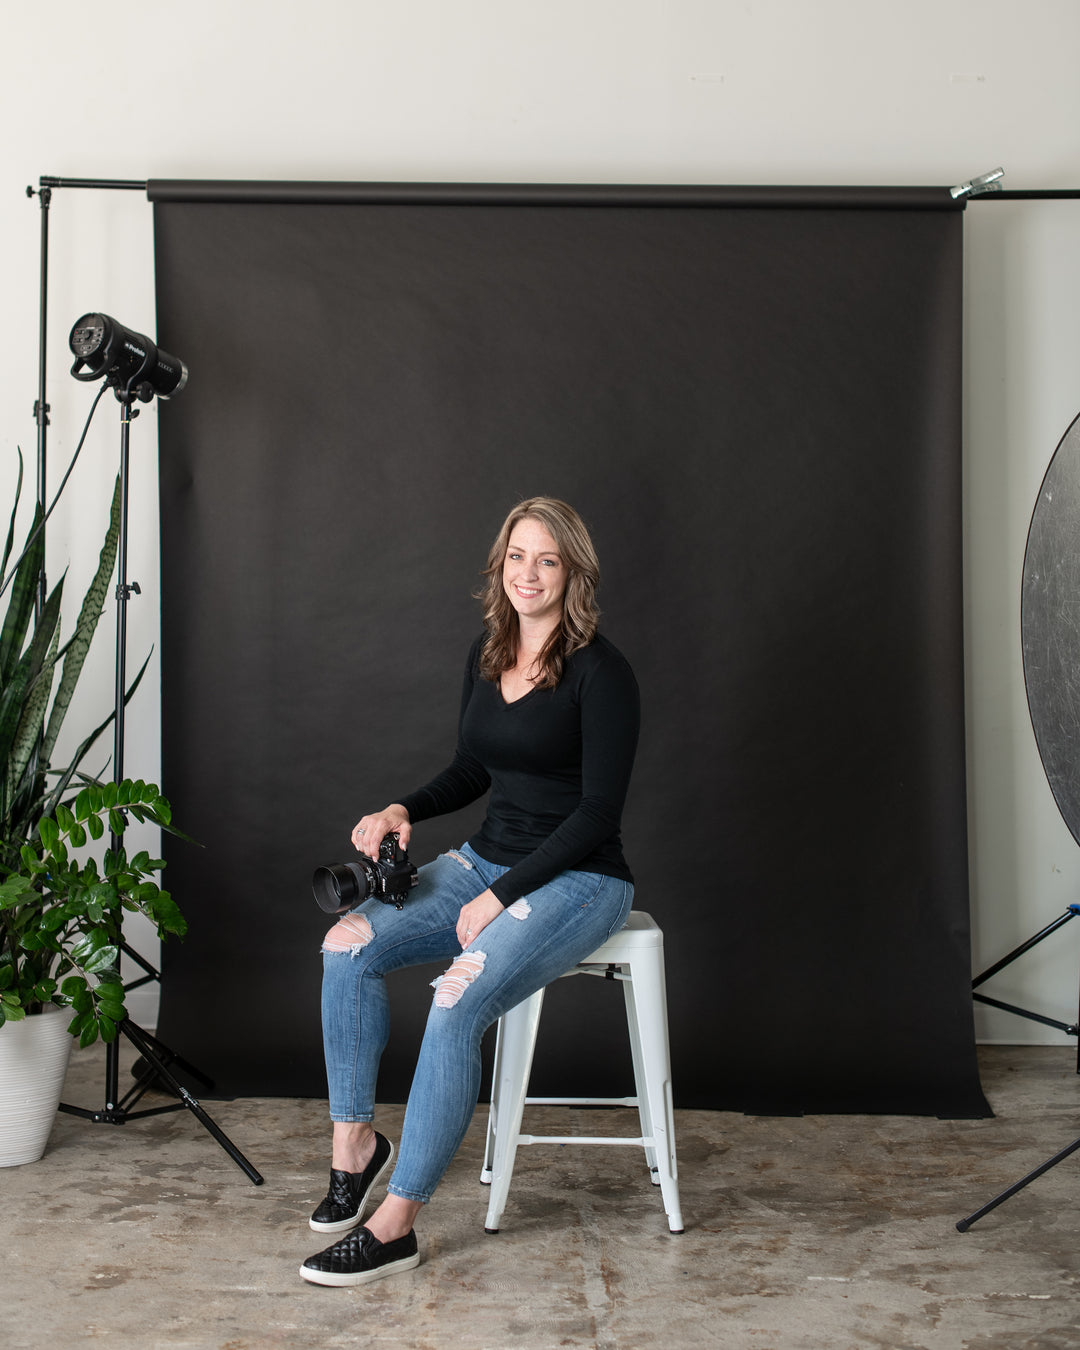 Photographer and Lawyer Rachel Brenke sitting on stool in studio with her camera